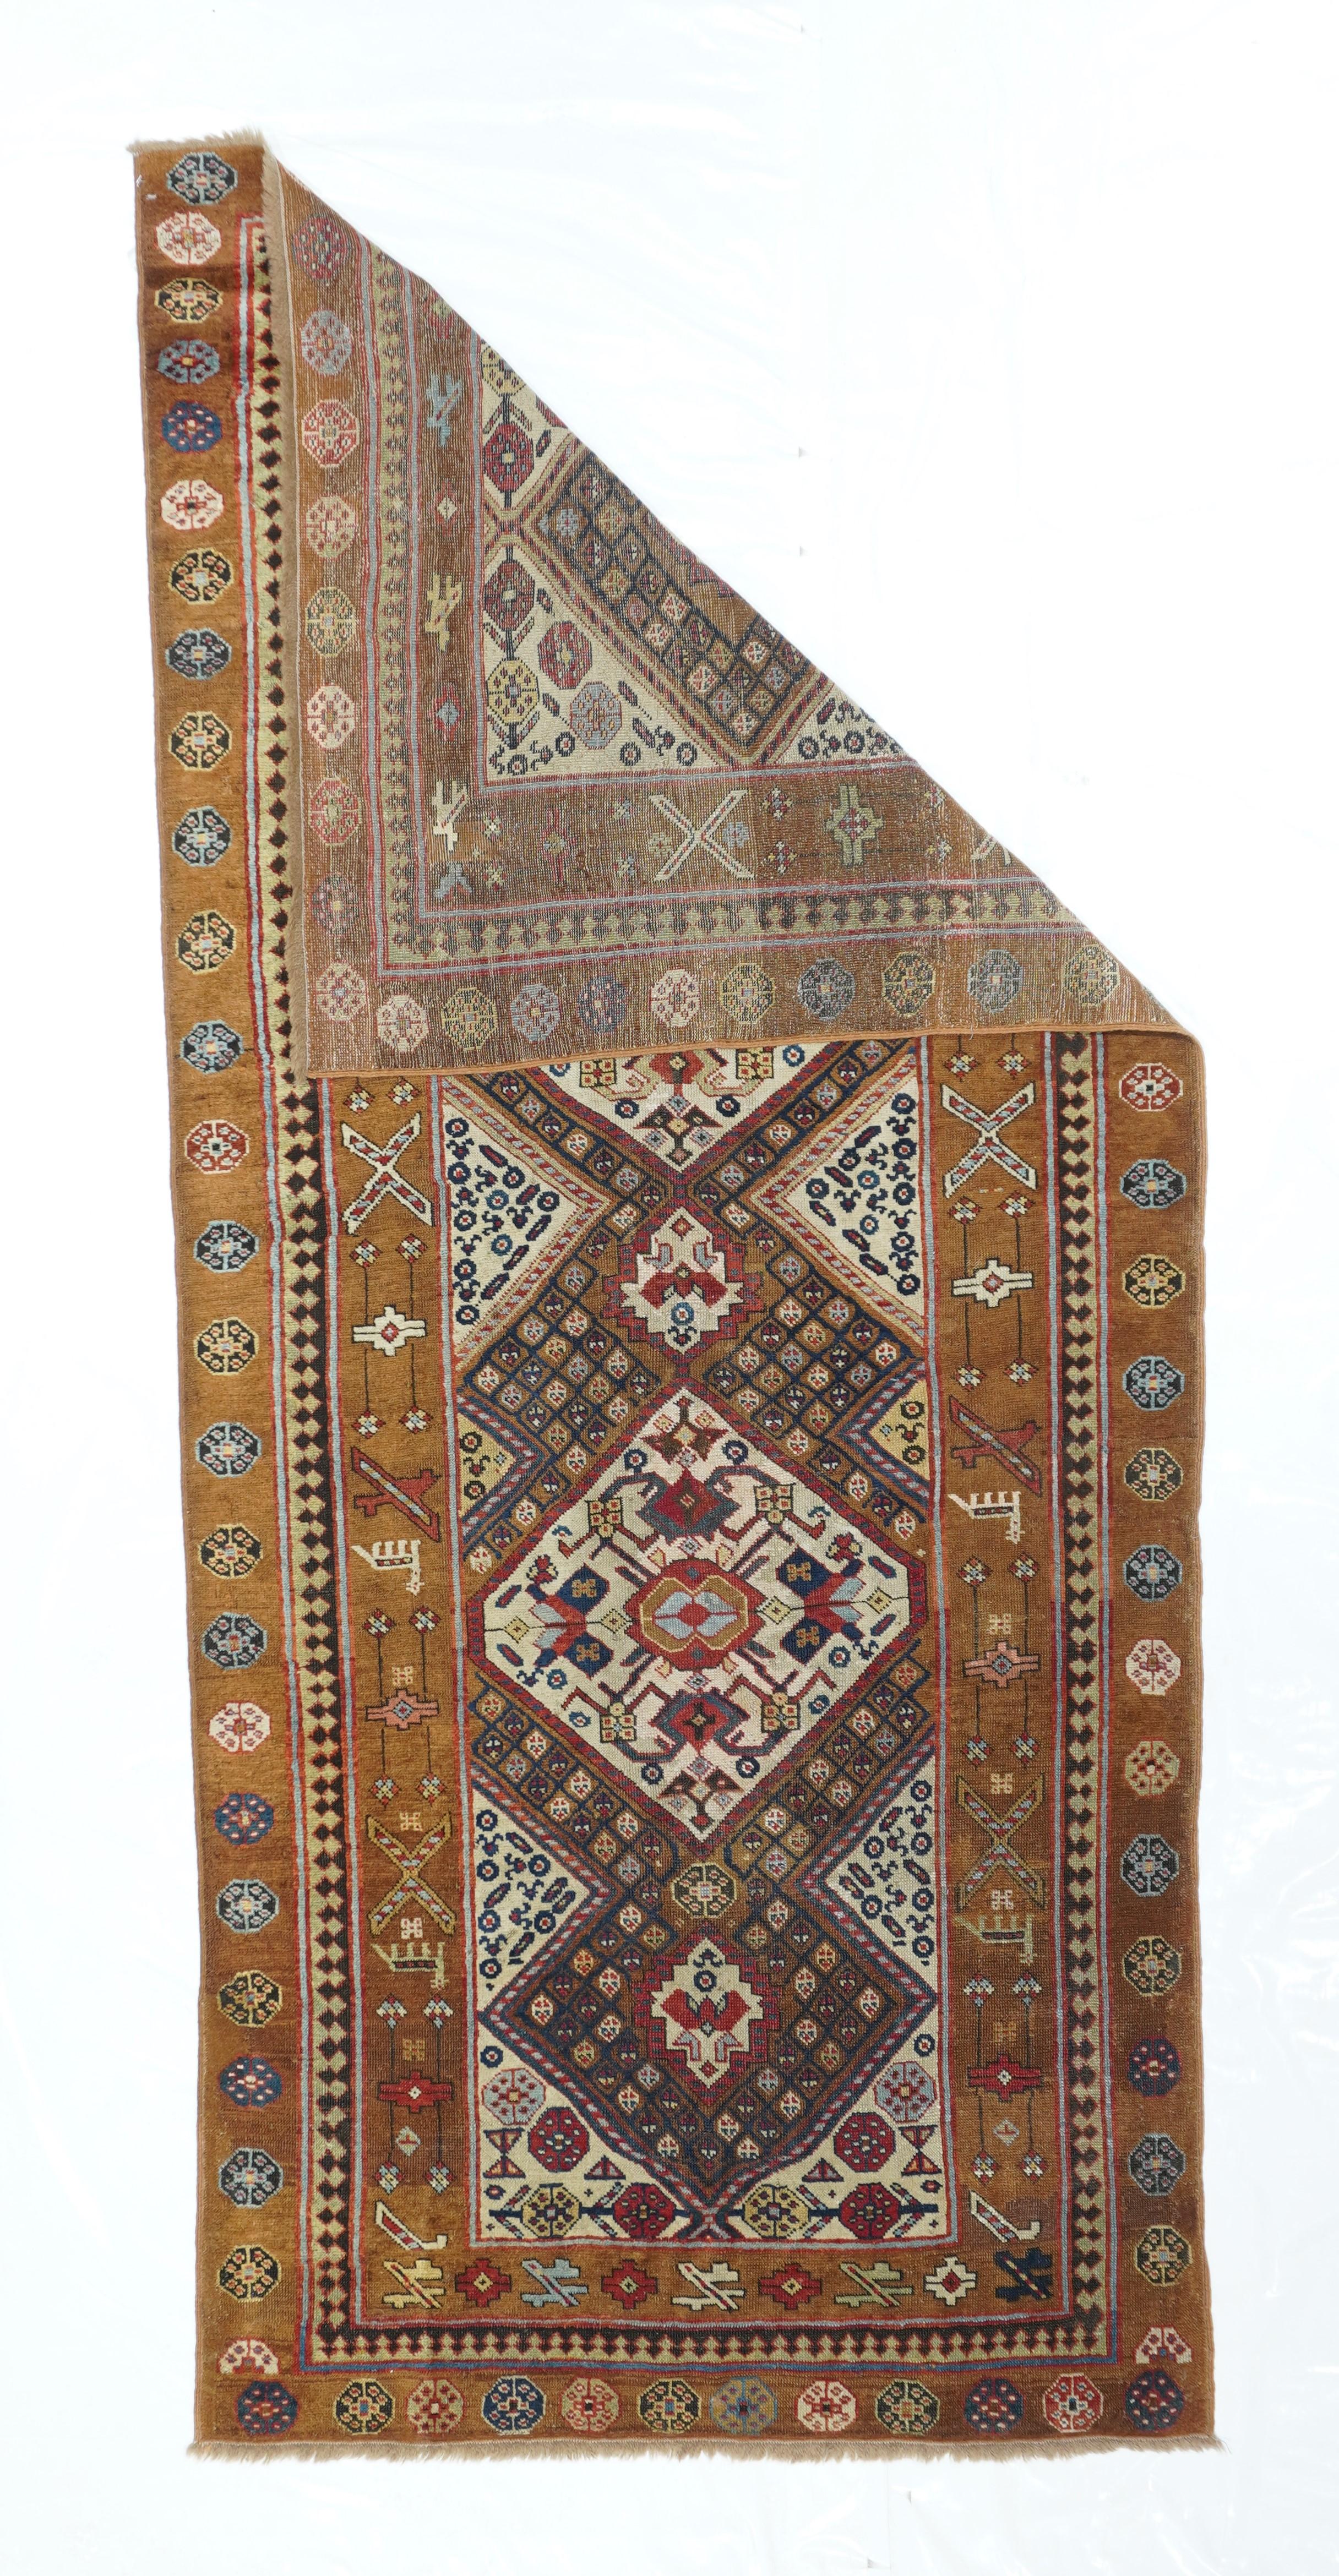 Antique Sarab Rug 3'7'' x 8'. A study in camel tones, ecru and darkest brown, with two hexagonal cream medallions surrounded with tiny diamonds enclosing tinier flowers; ecru triangular corners with diminutive cloud bands. Camel border with large